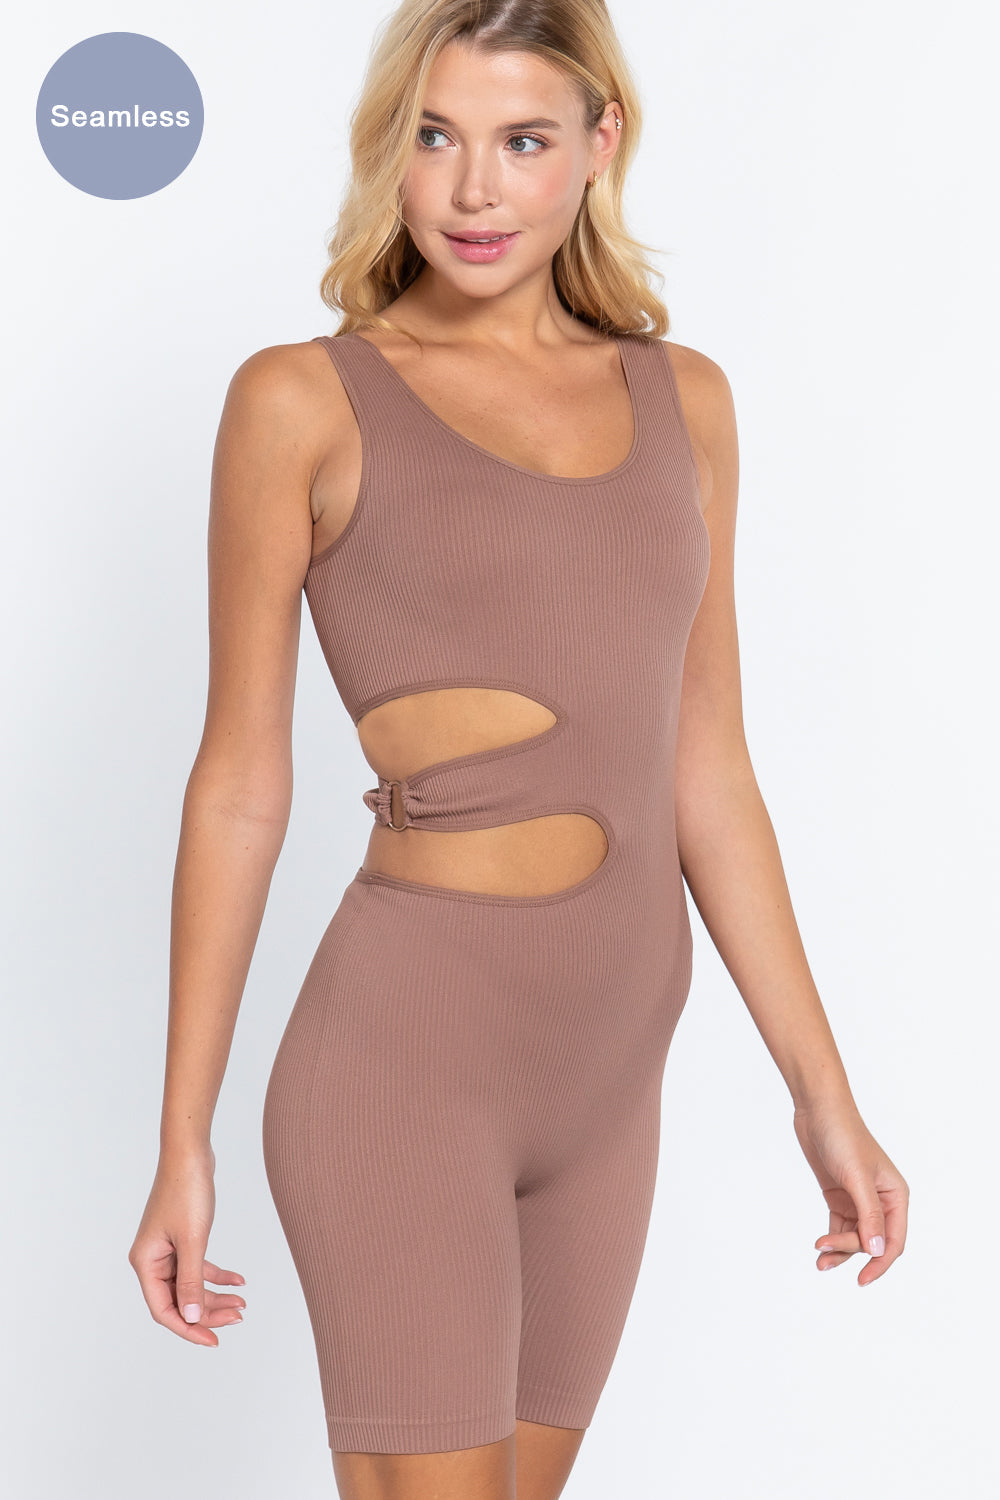 Tank tops Suave Cut-out Seamless Mauve Romper Jumpsuits & Rompers jehouze 